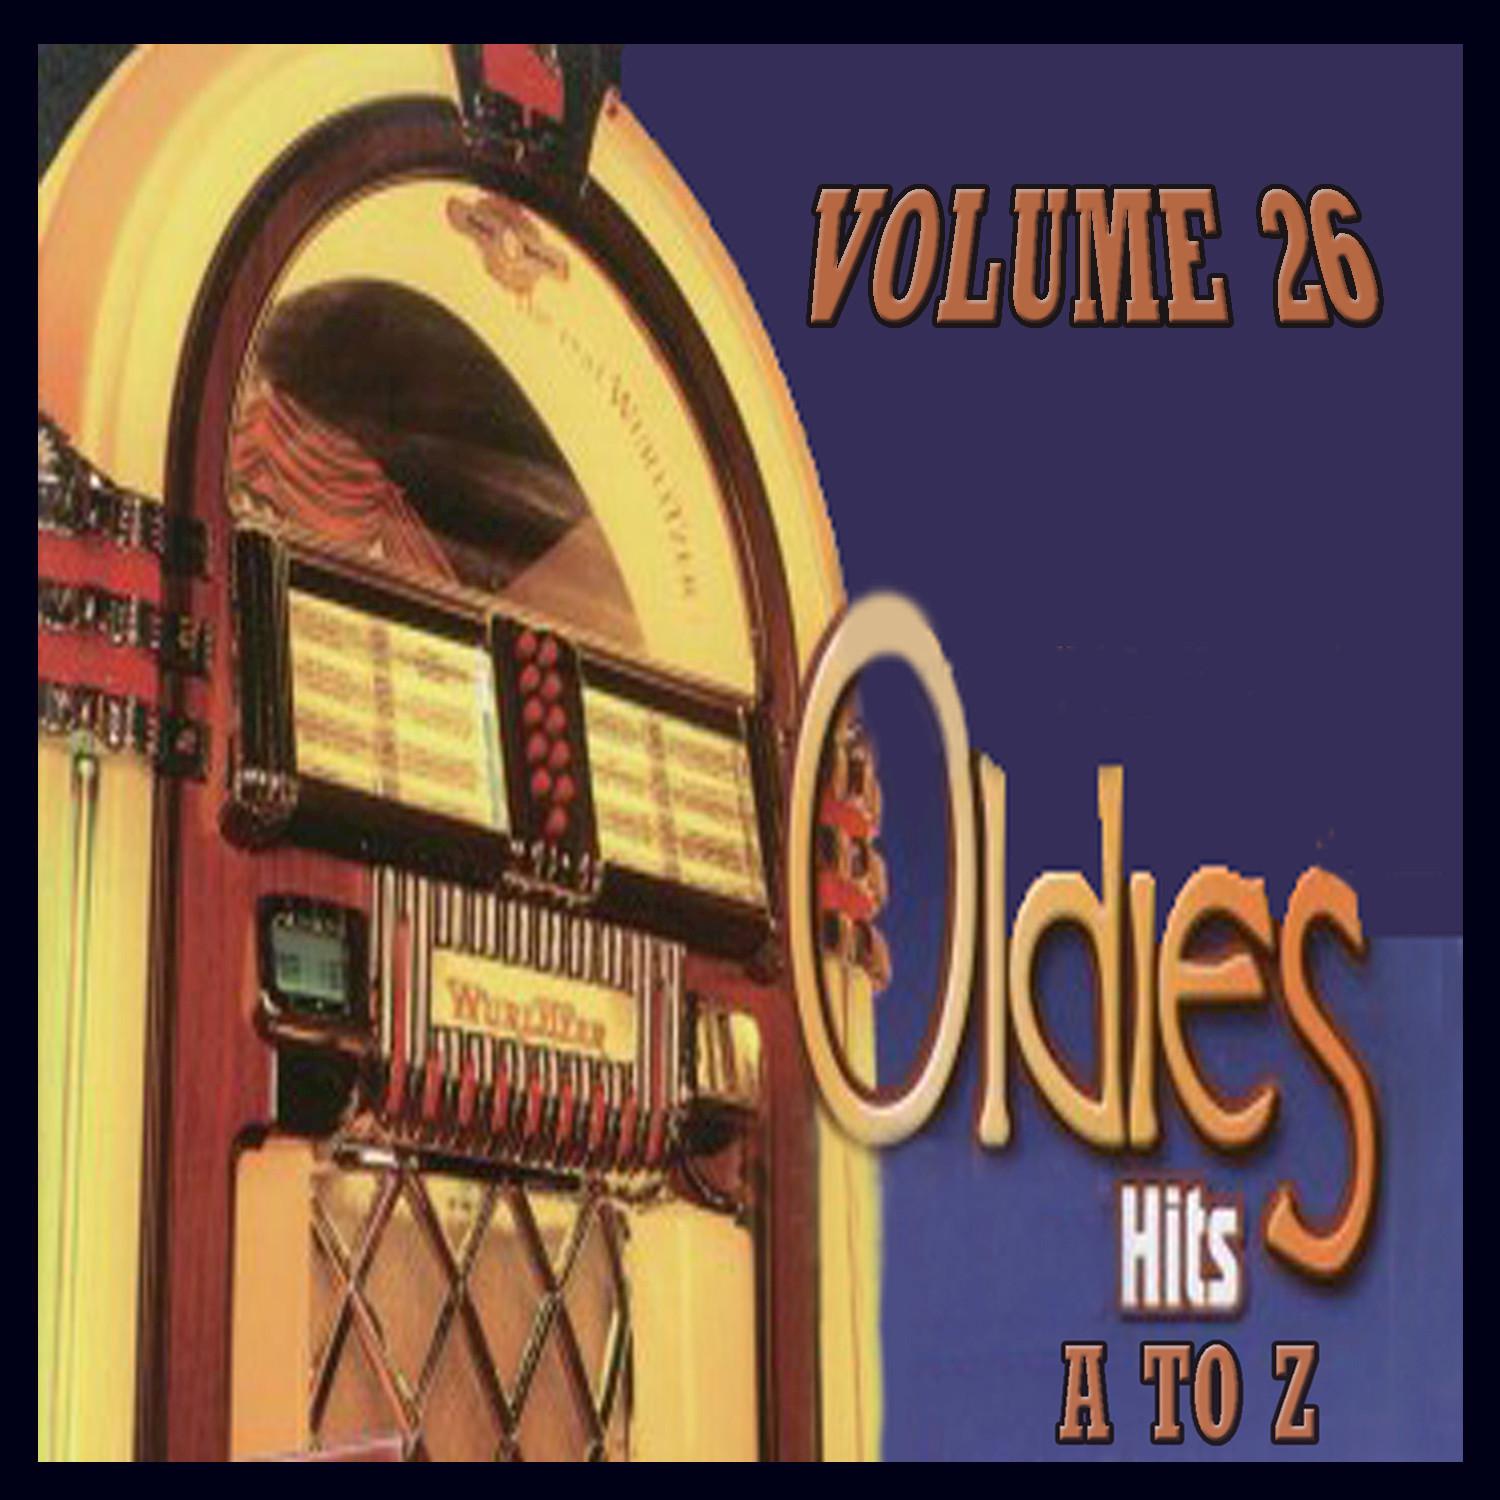 Oldies Hits A to Z, Vol. 26